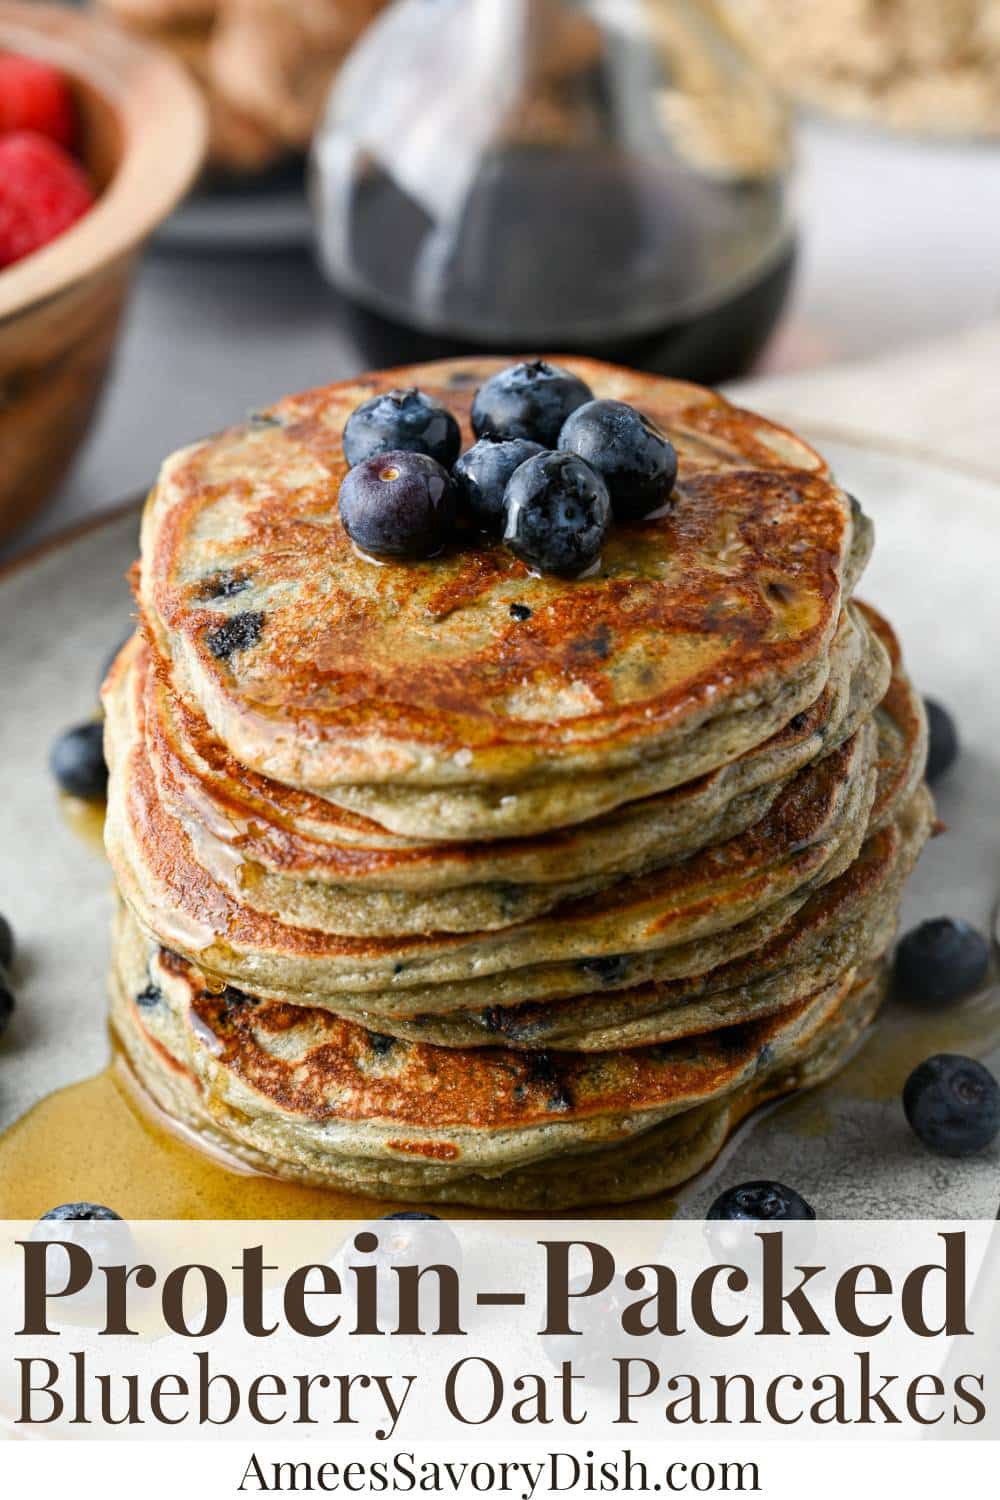 These easy from-scratch High Protein Blueberry Oat Pancakes are an excellent alternative to traditional buttermilk pancakes, made with oat flour, protein powder, and cottage cheese. via @Ameessavorydish